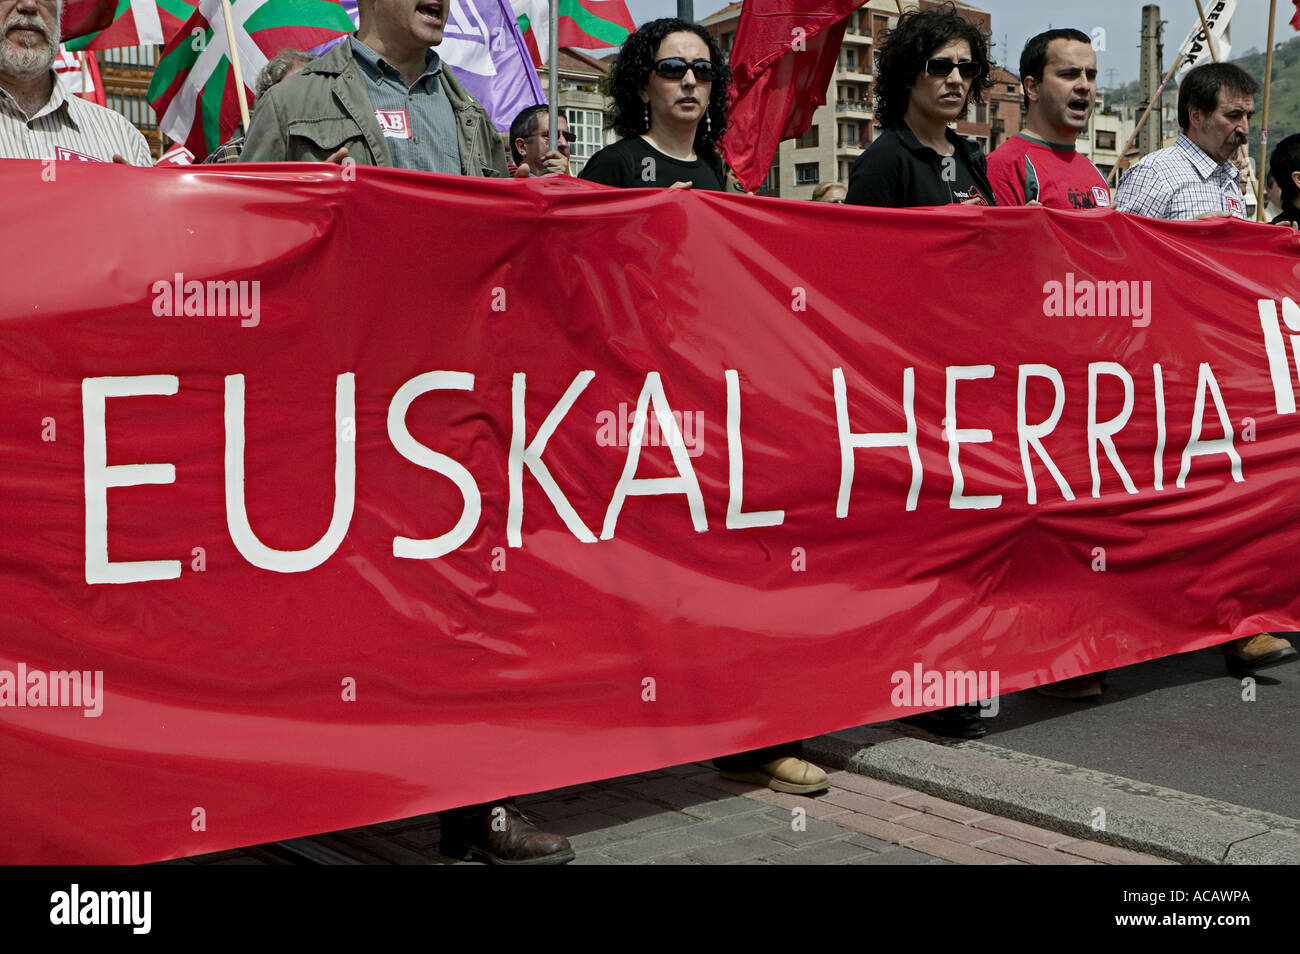 The words Euskal Herria on a red banner during political demonstration  in central Bilbao, Pais Vasco (Basque Country) Spain. Stock Photo